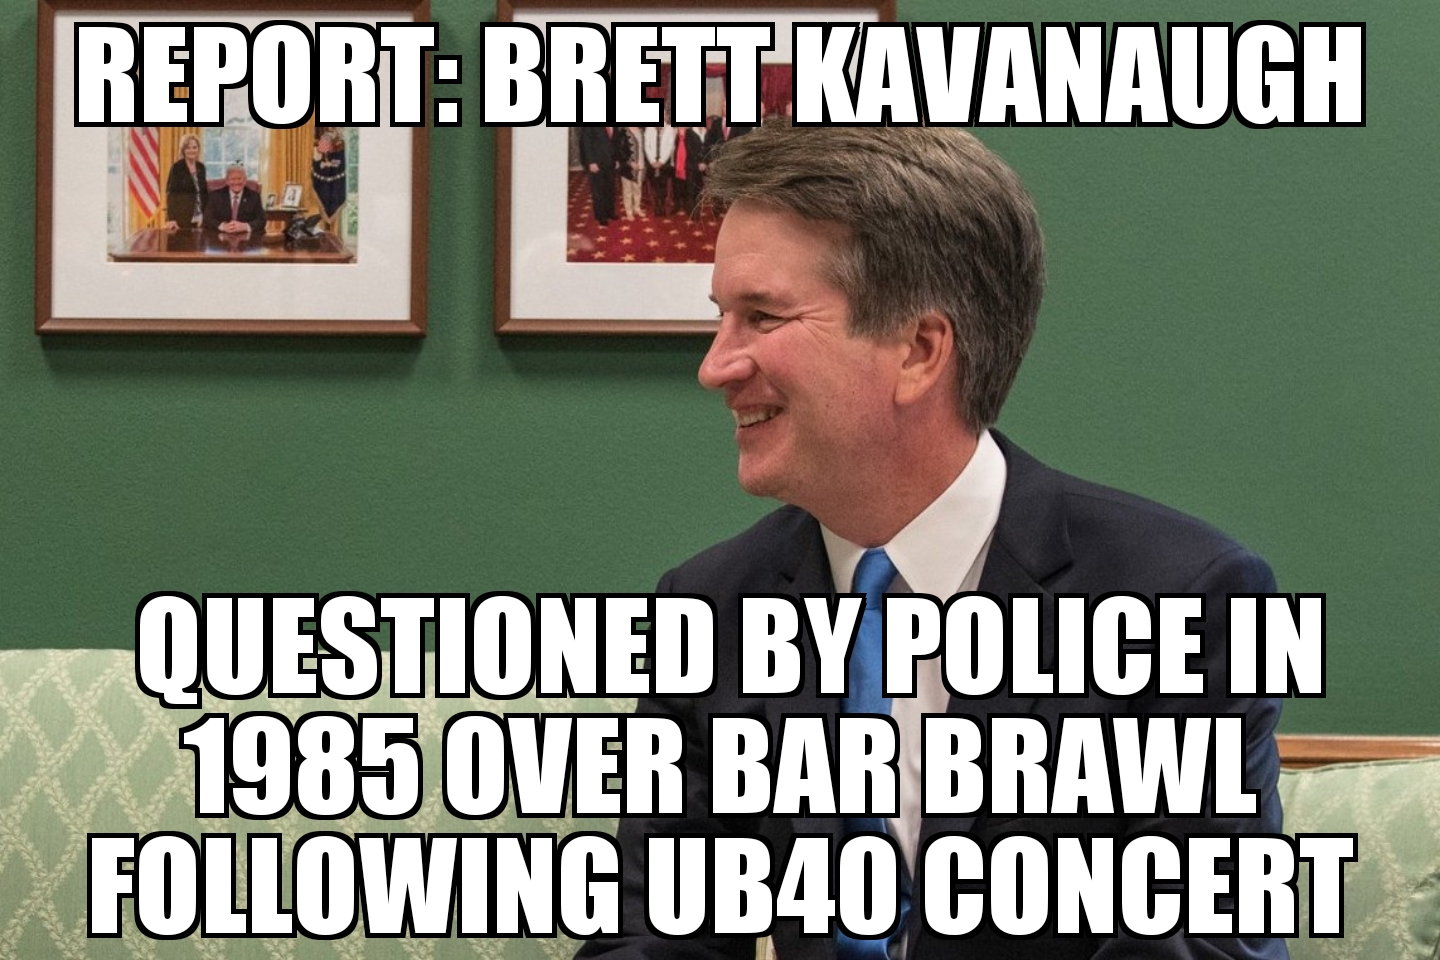 Kavanaugh questioned in 1985 over bar brawl